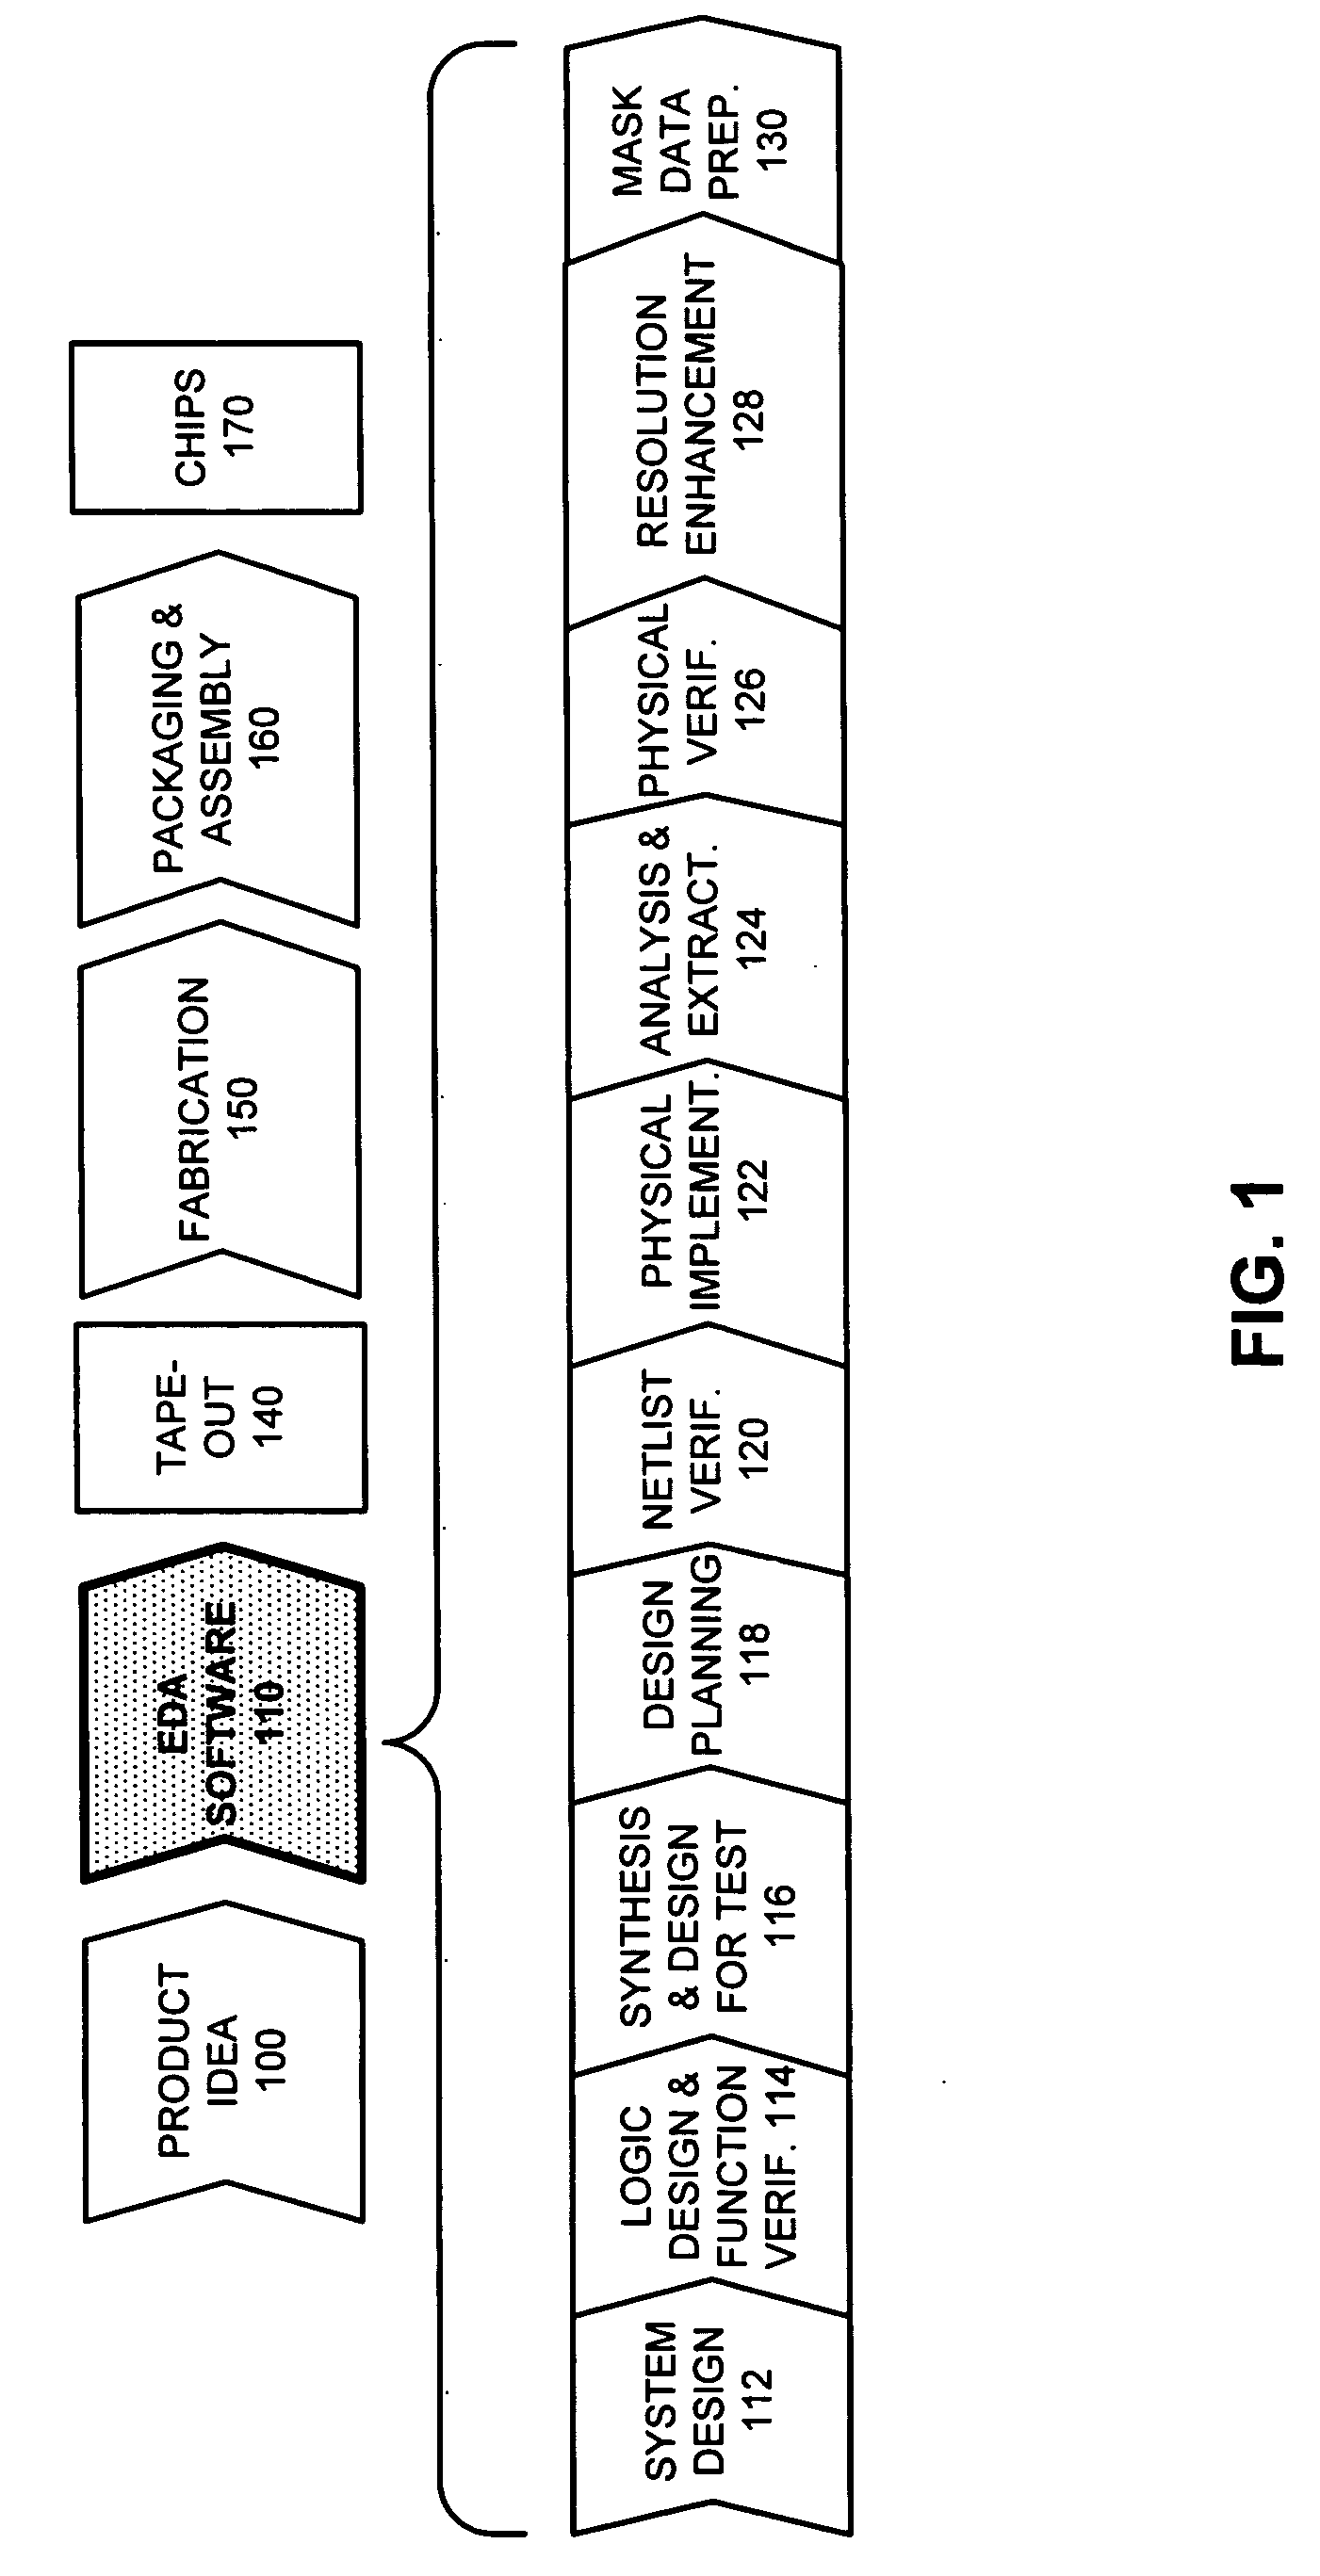 Method and apparatus for determining an improved assist feature configuration in a mask layout